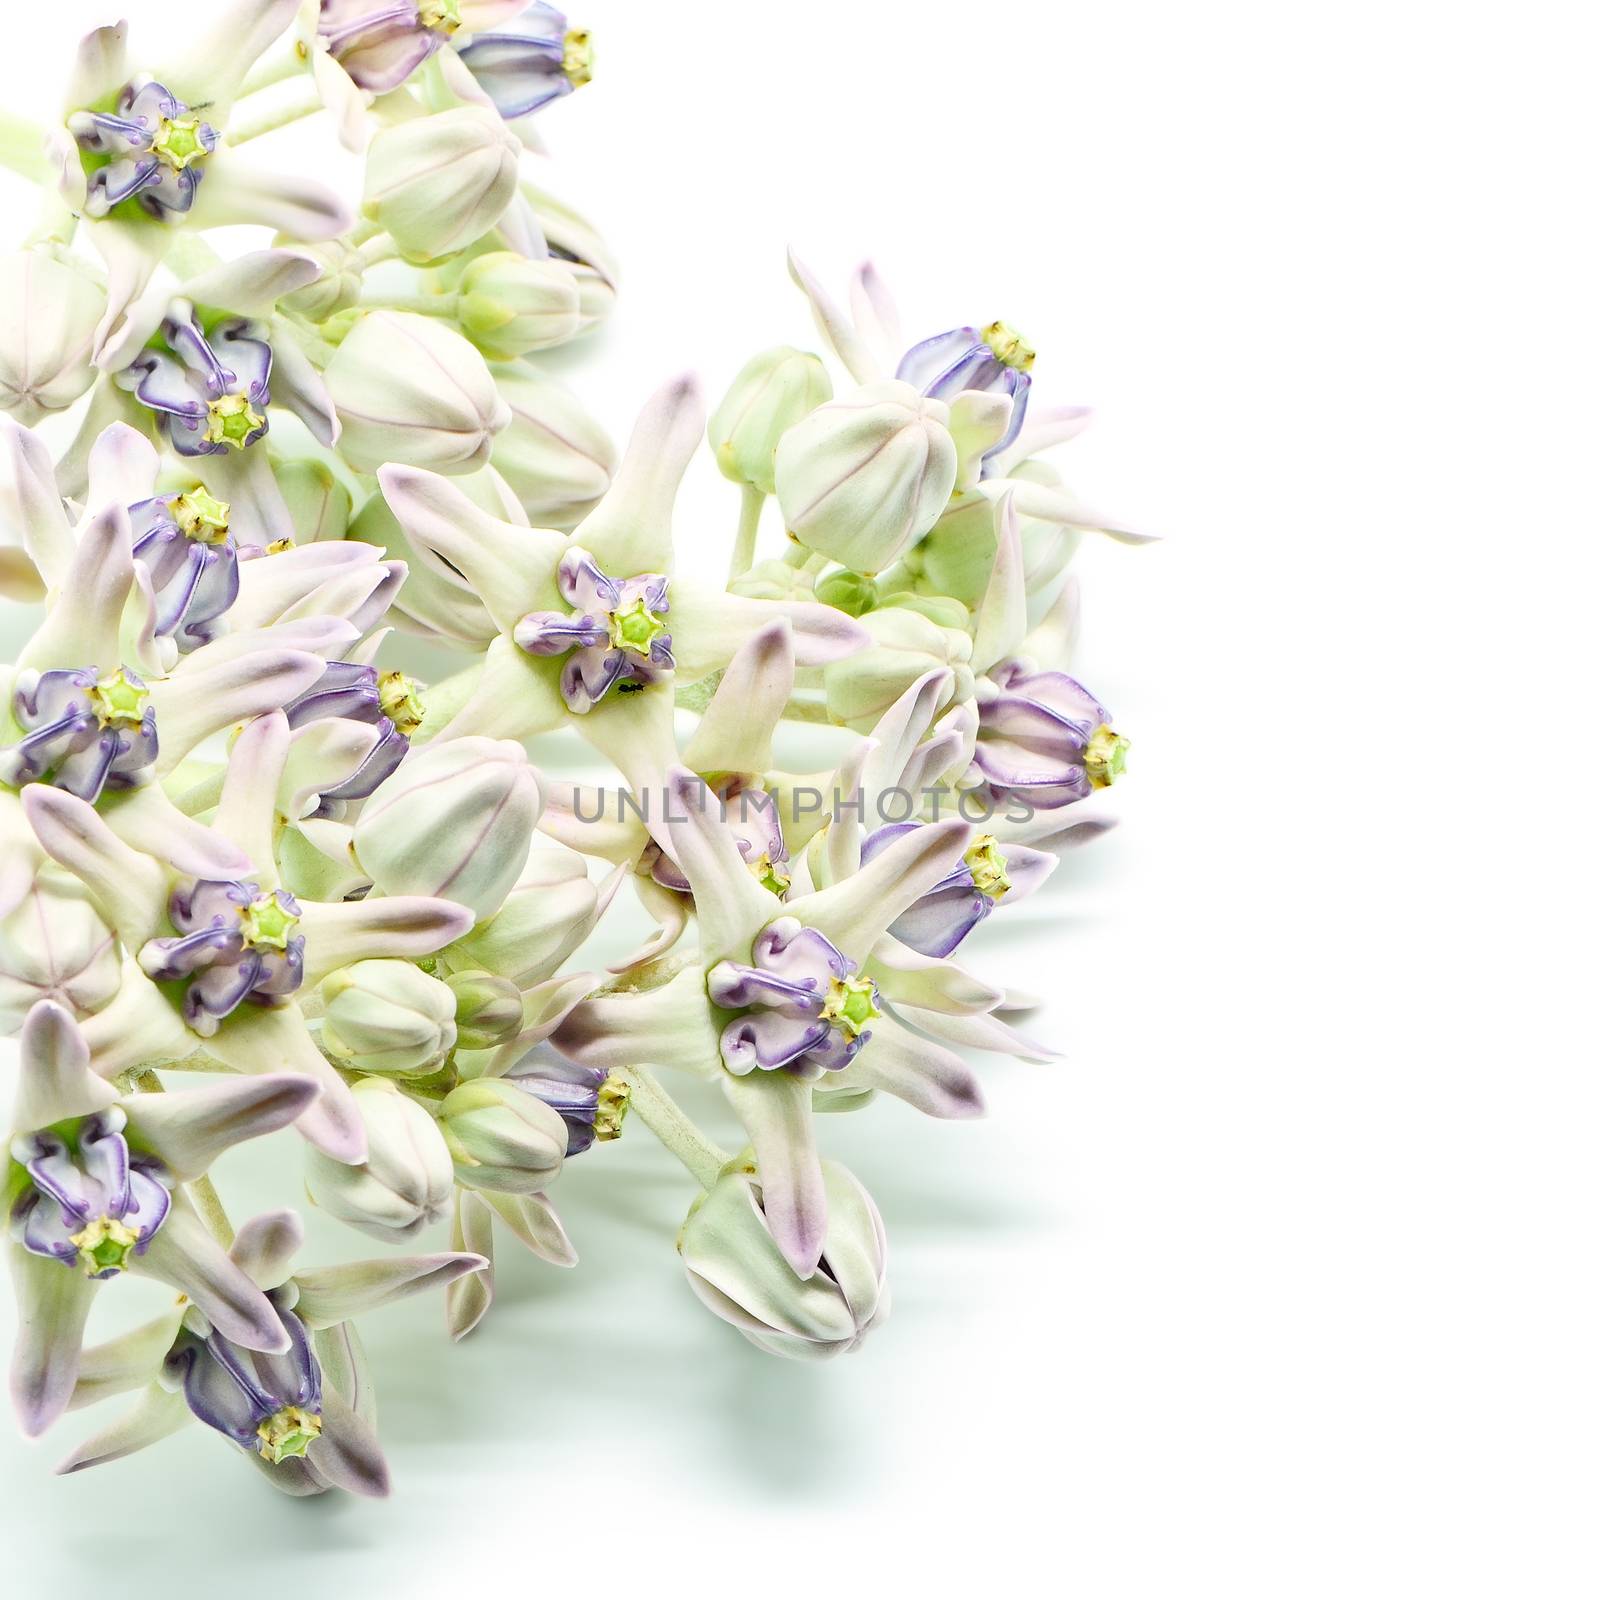 Colorful white and purple flower, Crown Flower, Giant Indian Milkweed, Gigantic Swallowwort (Calotropis gigantea) isolated on a white background 